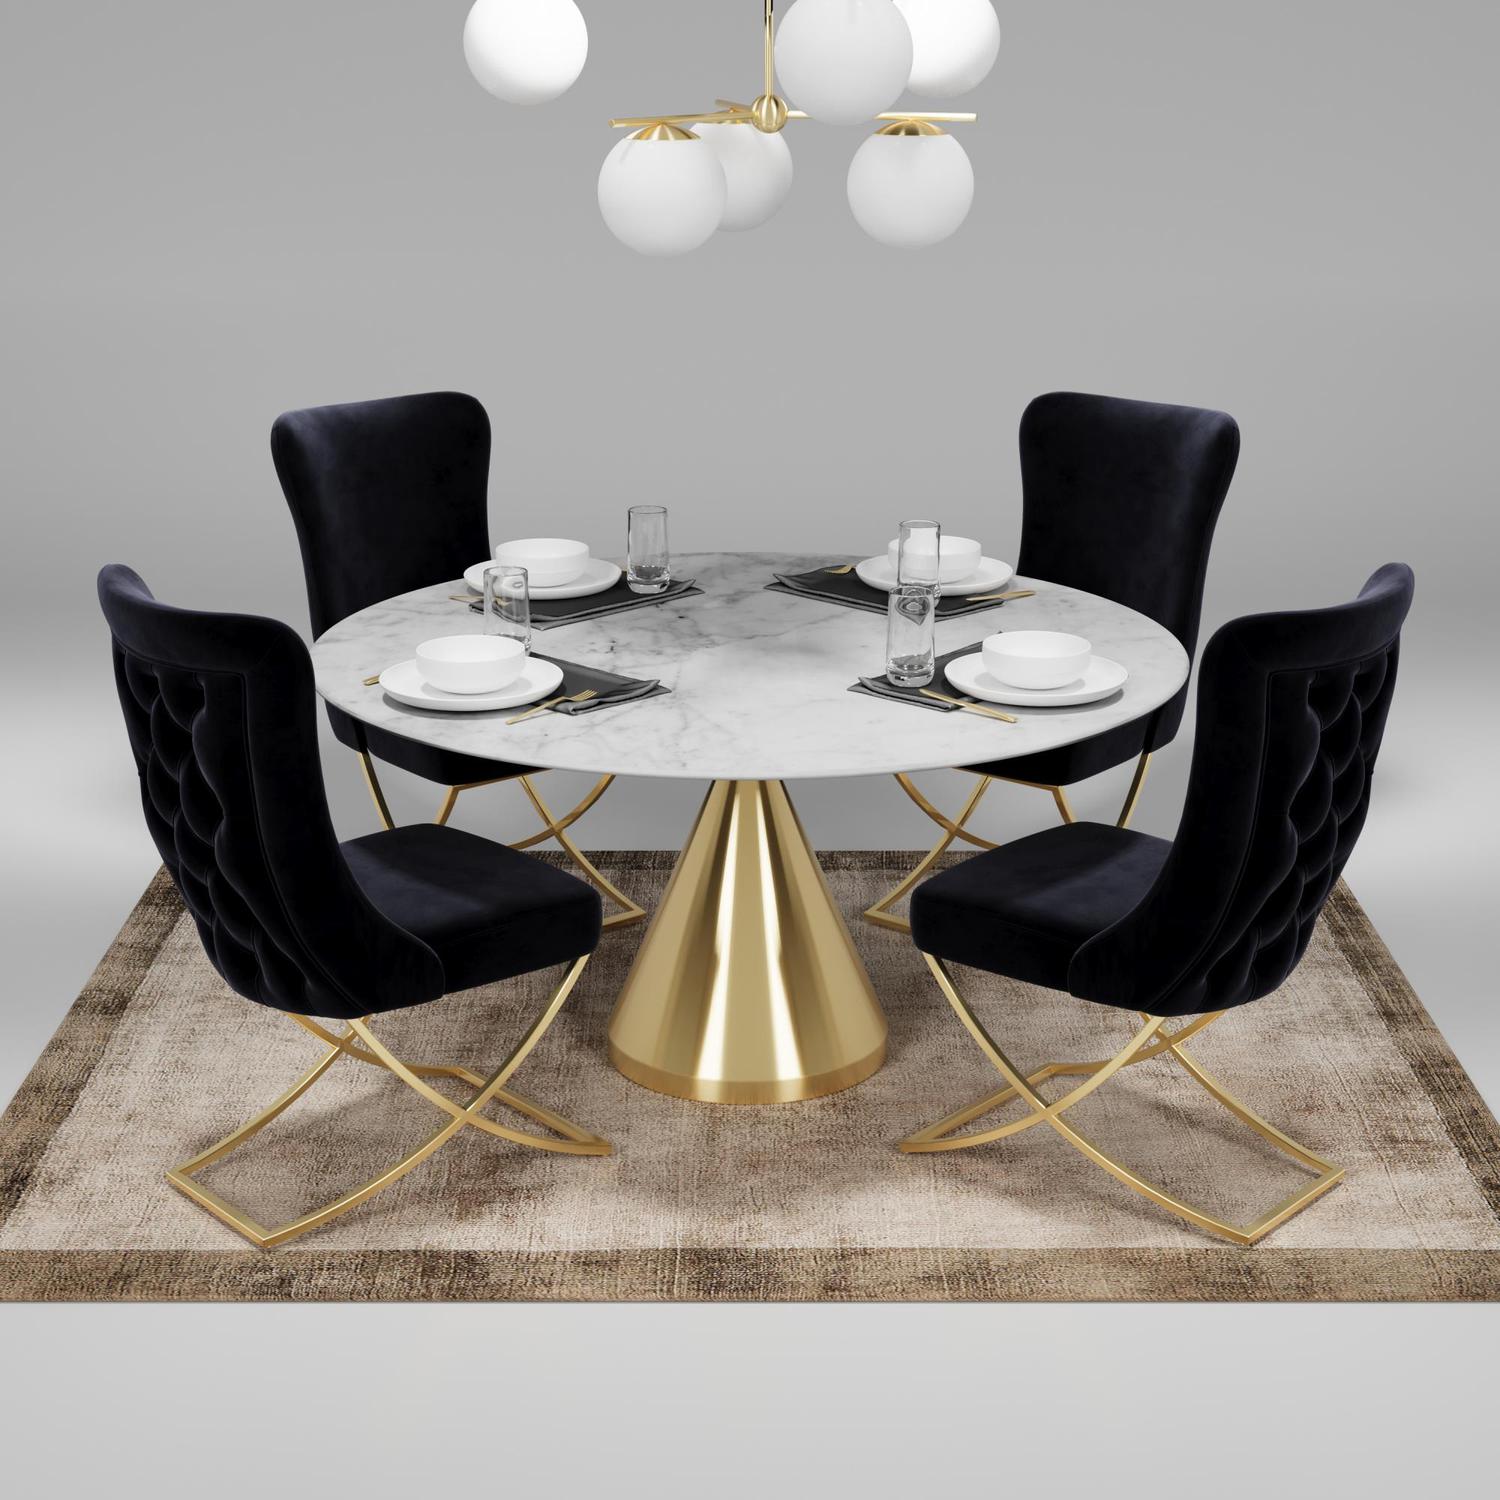 Sultan Collection Wing Back, Modern design, upholstered dining chair in Black with Gold Metal legs in a dining room with set of four chairs around a round table.